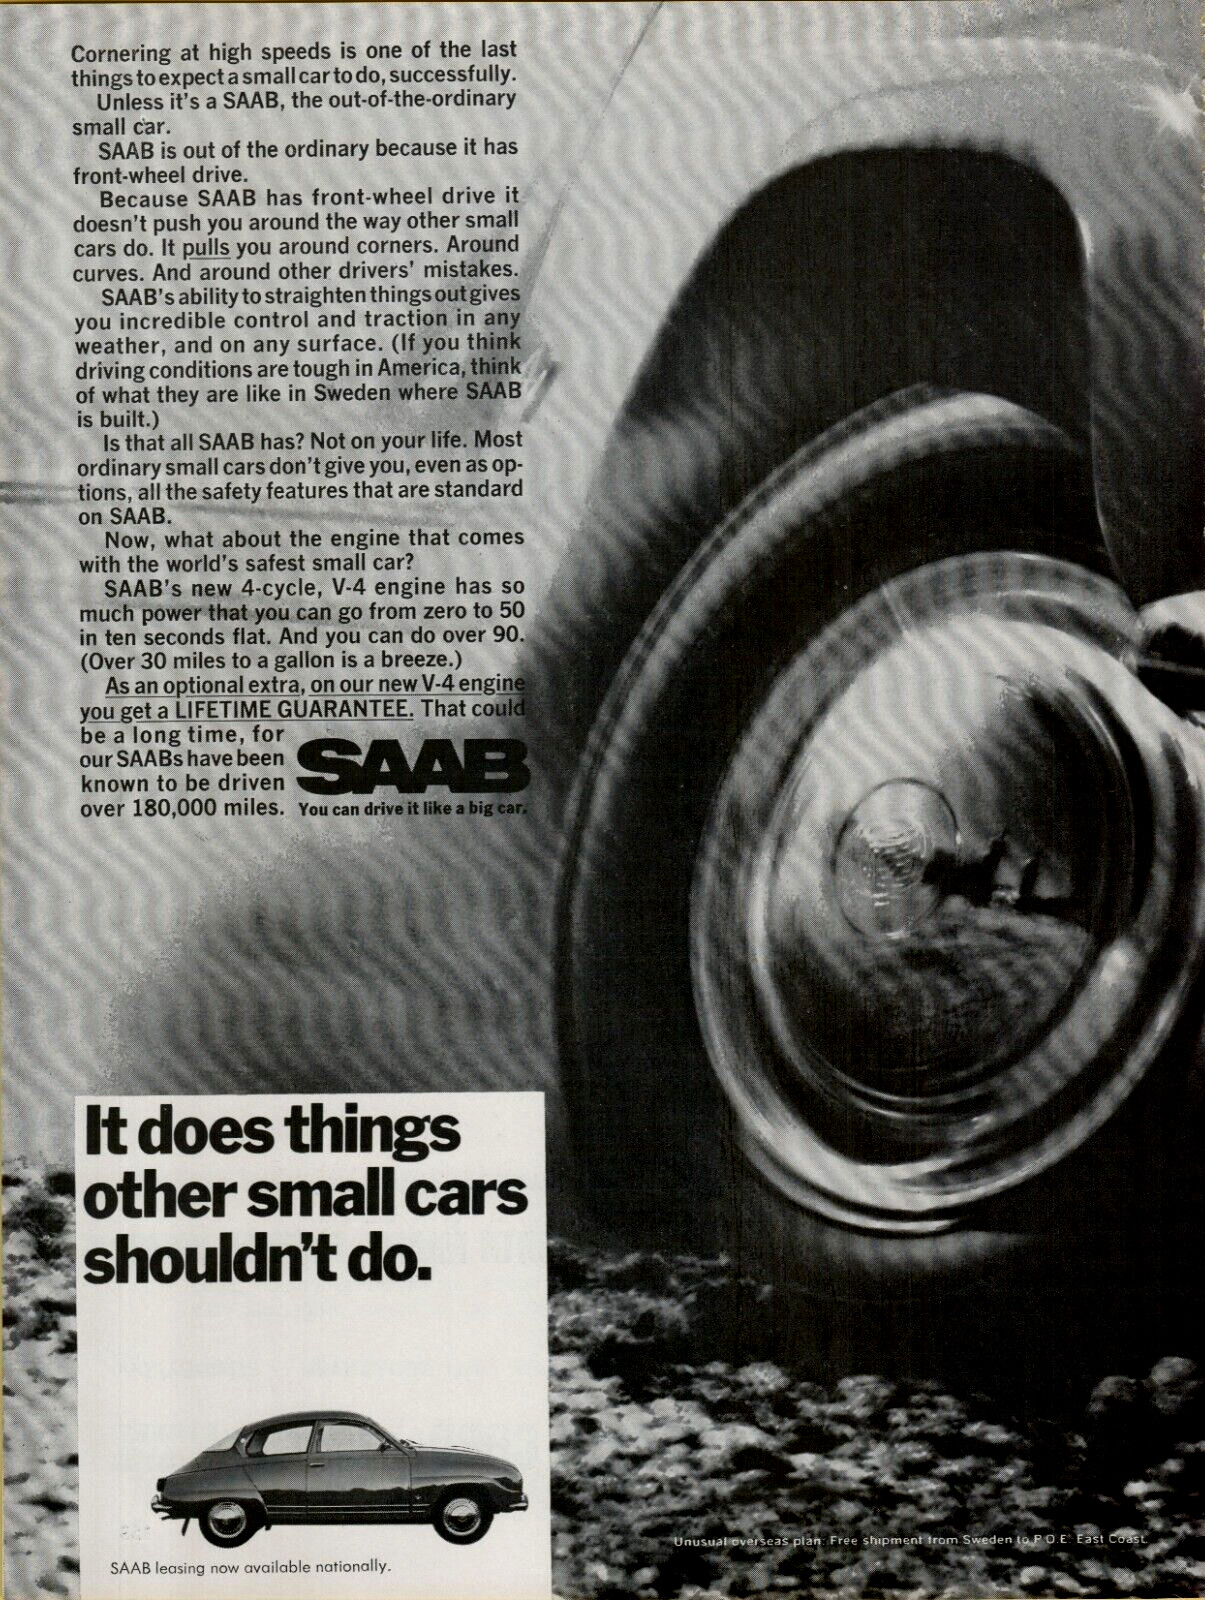 1968 Saab Front Wheel Drive Out of the Ordinary Small Car Photo Vintage Print Ad